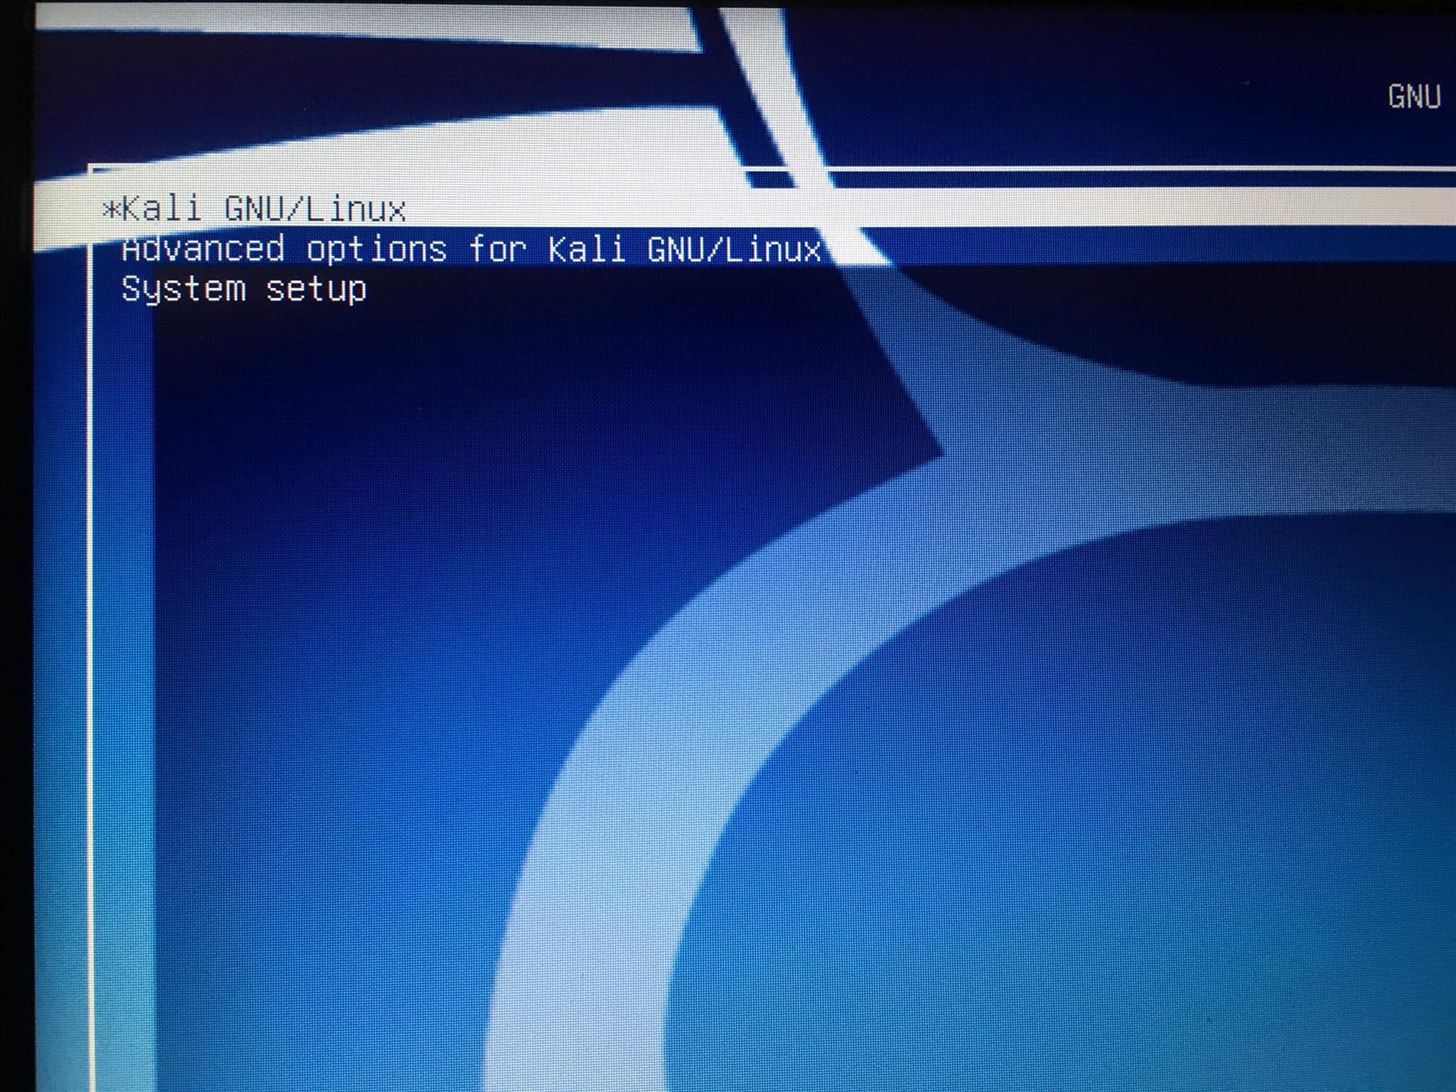 Cant Boot into Windows 10 After Installing Kali 2.0.